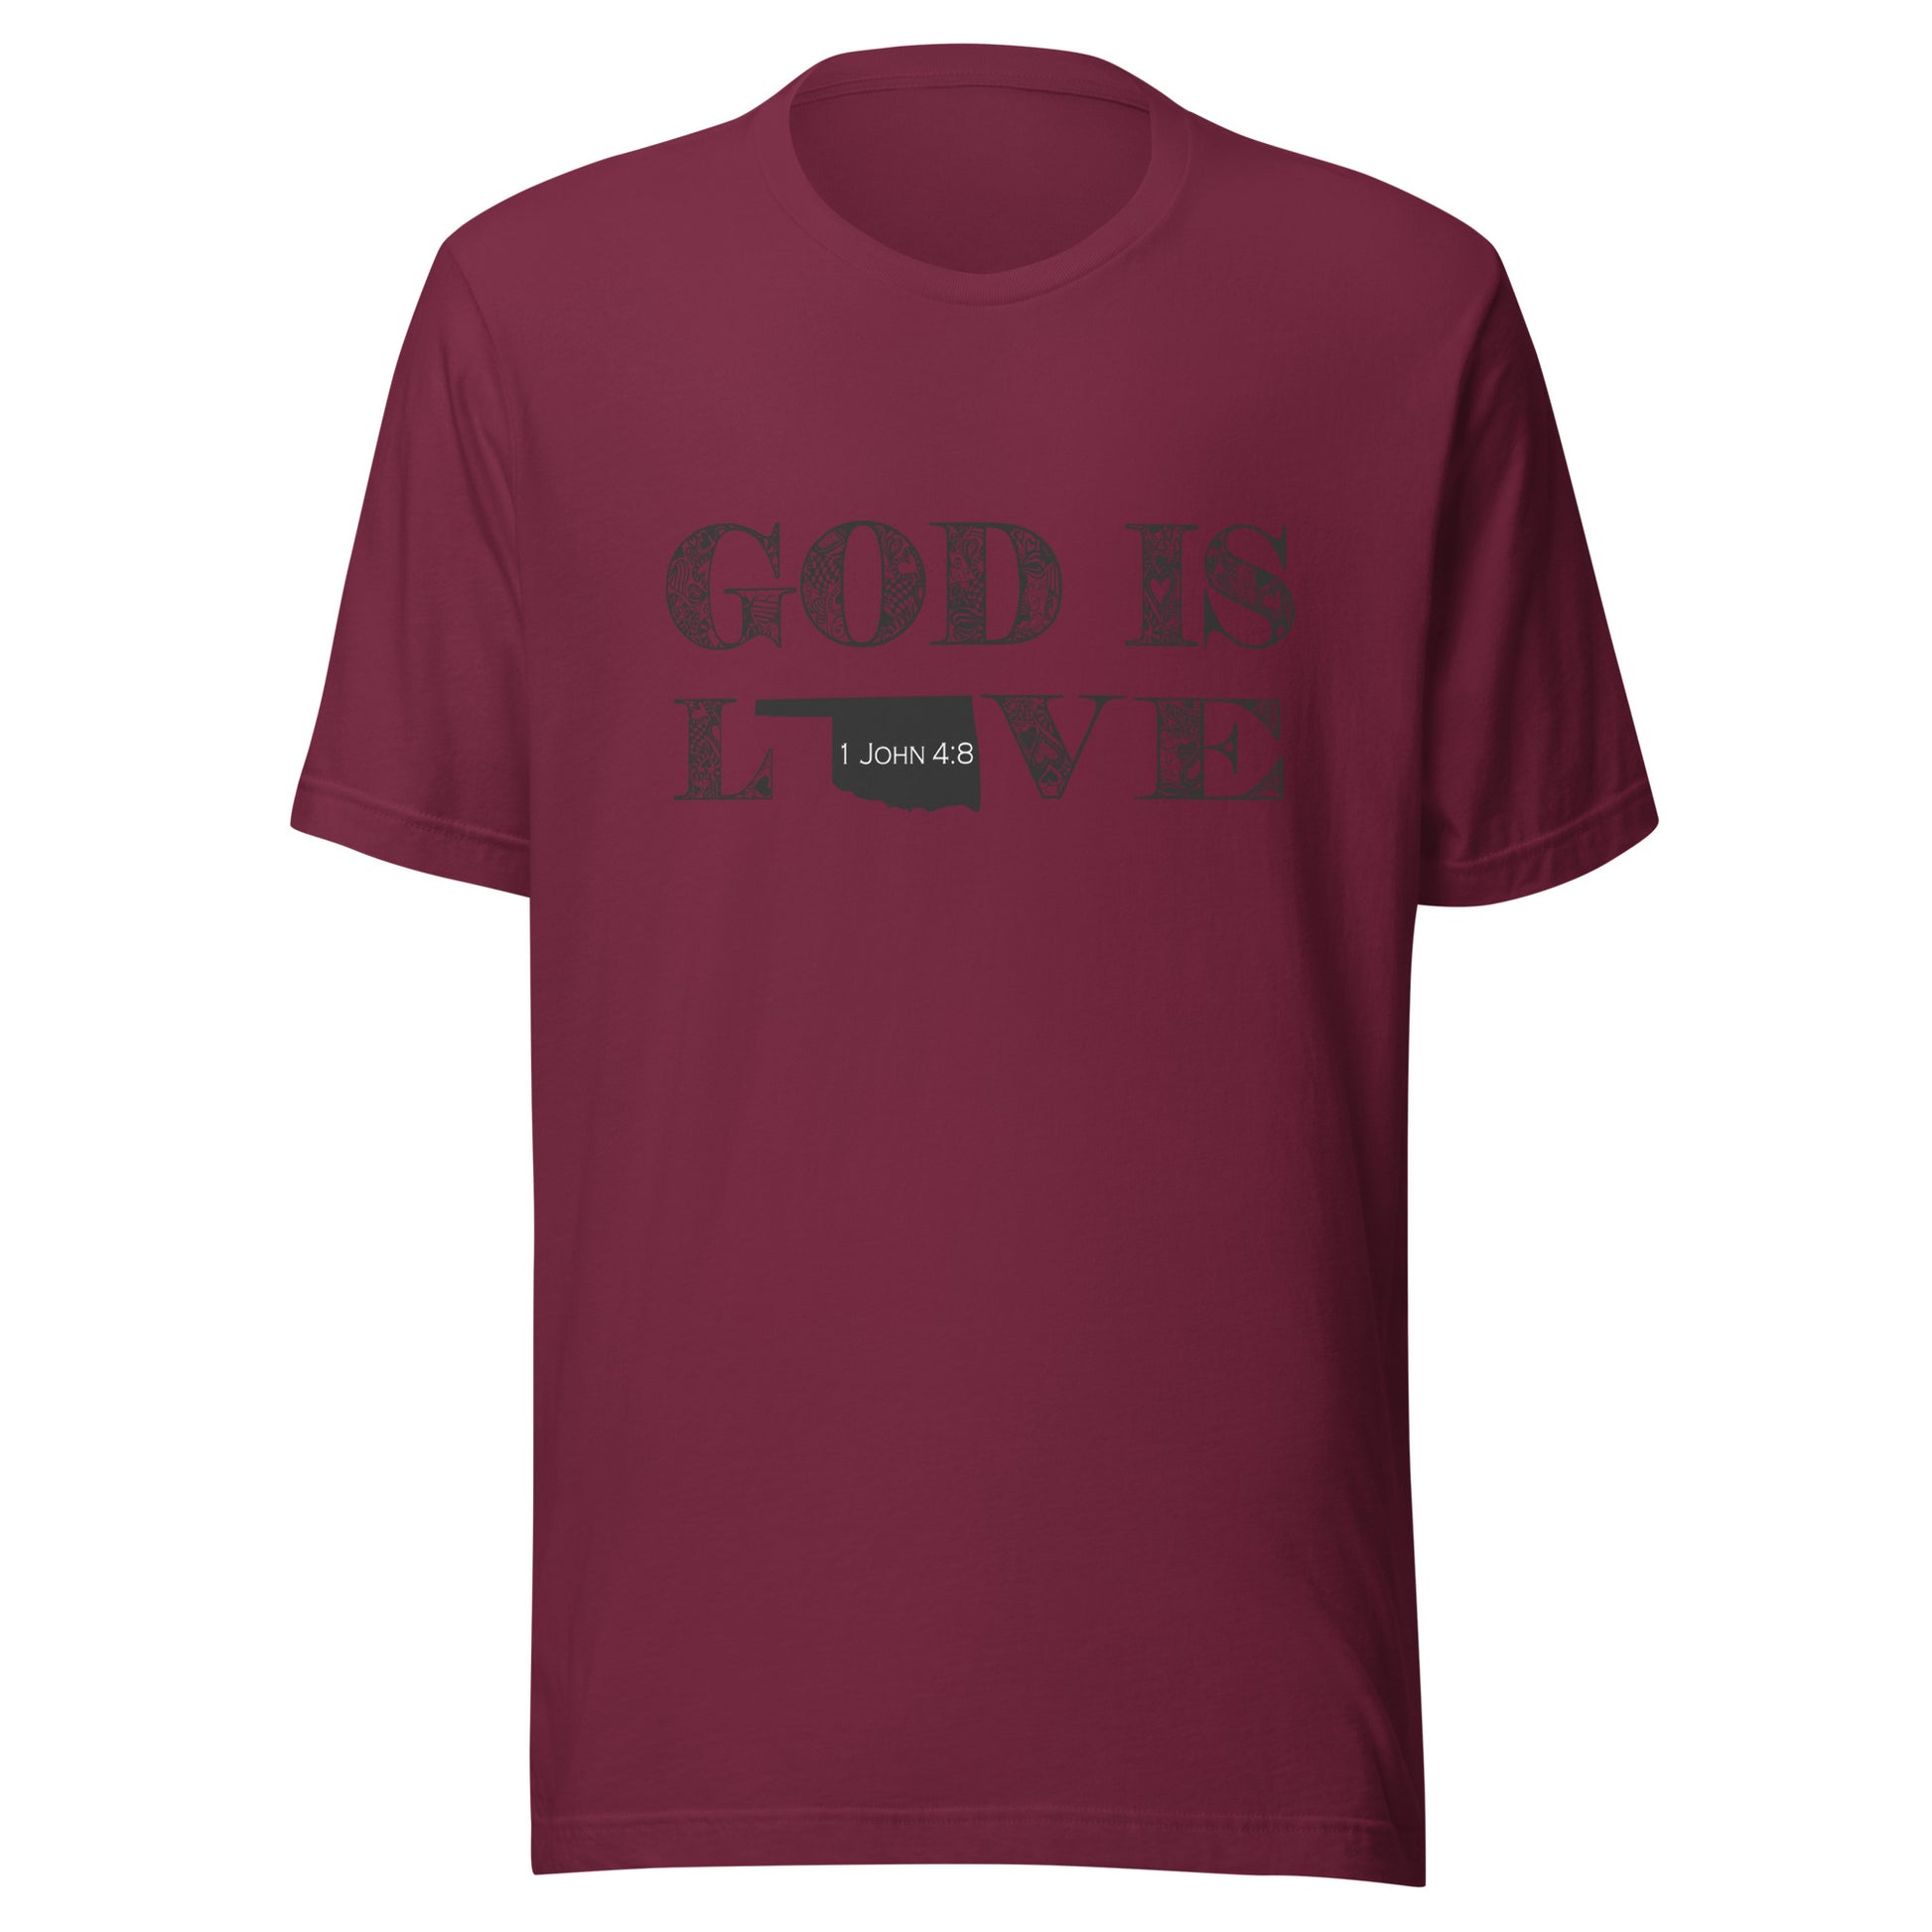 1 John 4:8 God is Love Unisex Oklahoma T-shirt in Maroon - front view